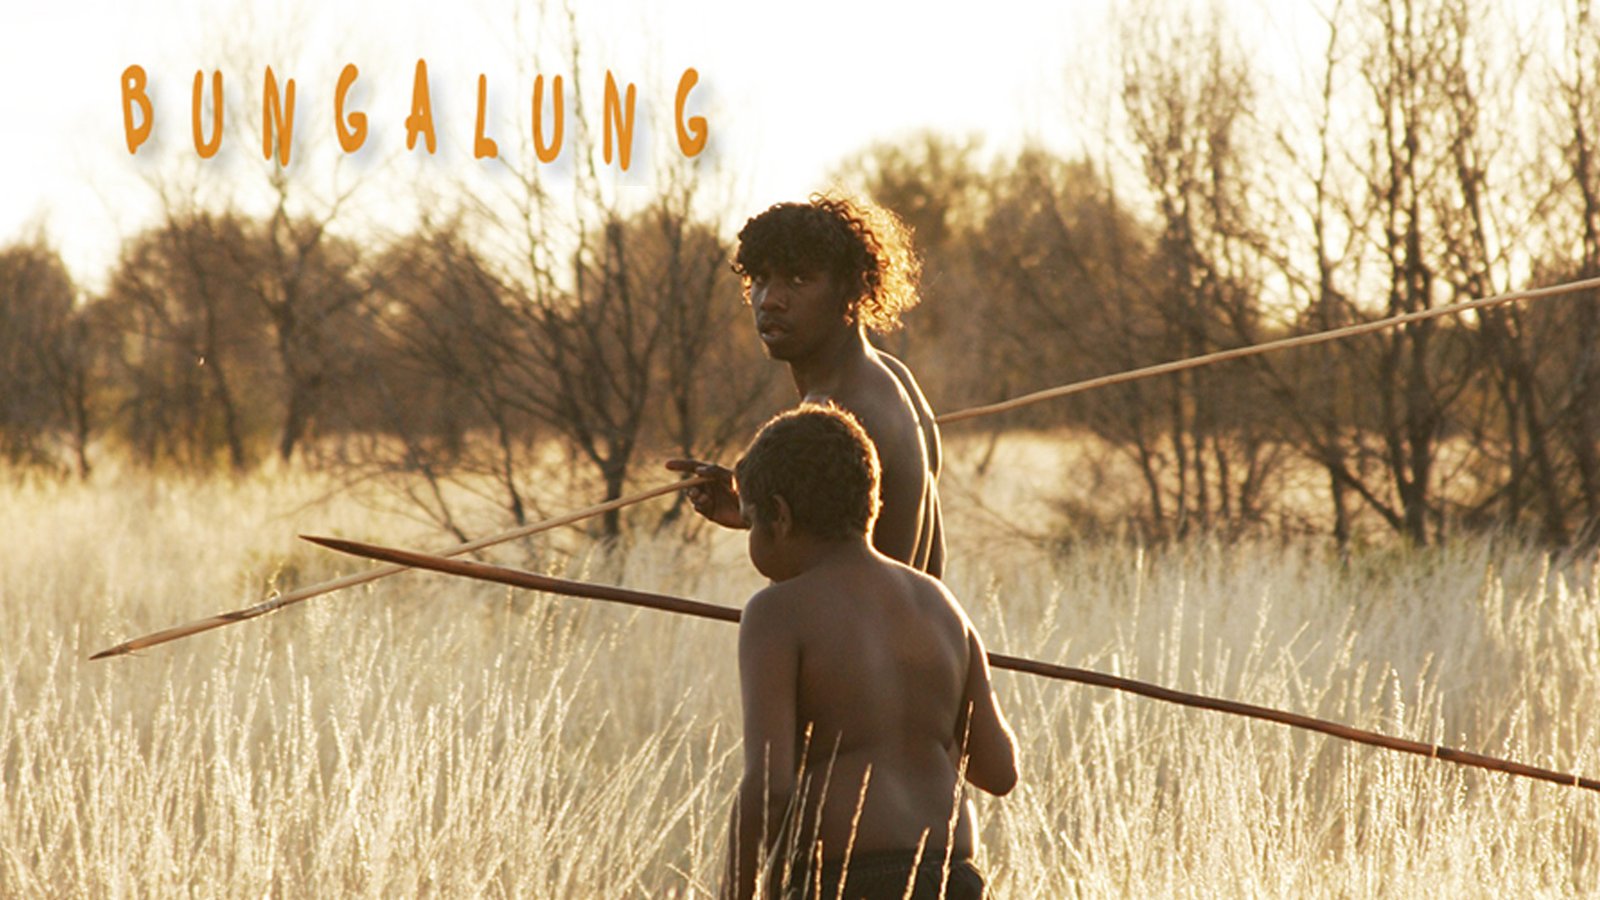 Bungalung - A Dreaming of Cannibals